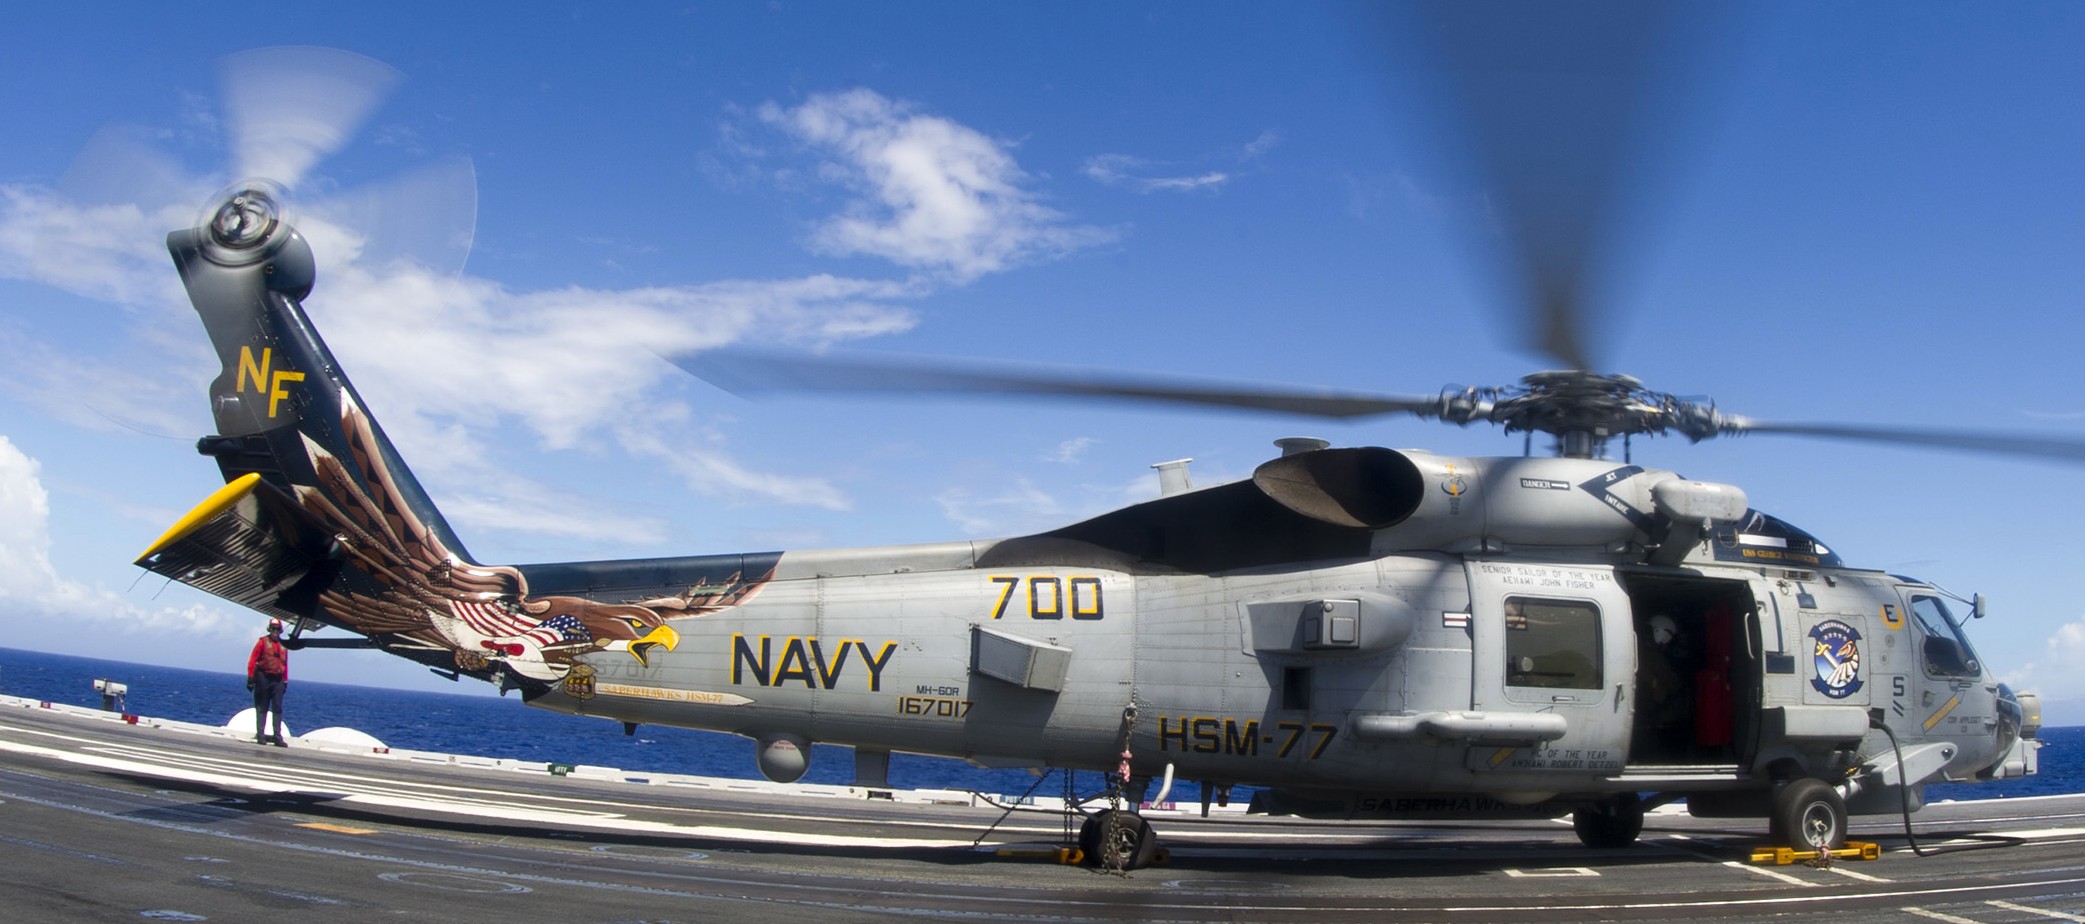 hsm-77 saberhawks helicopter maritime strike squadron us navy 2014 13